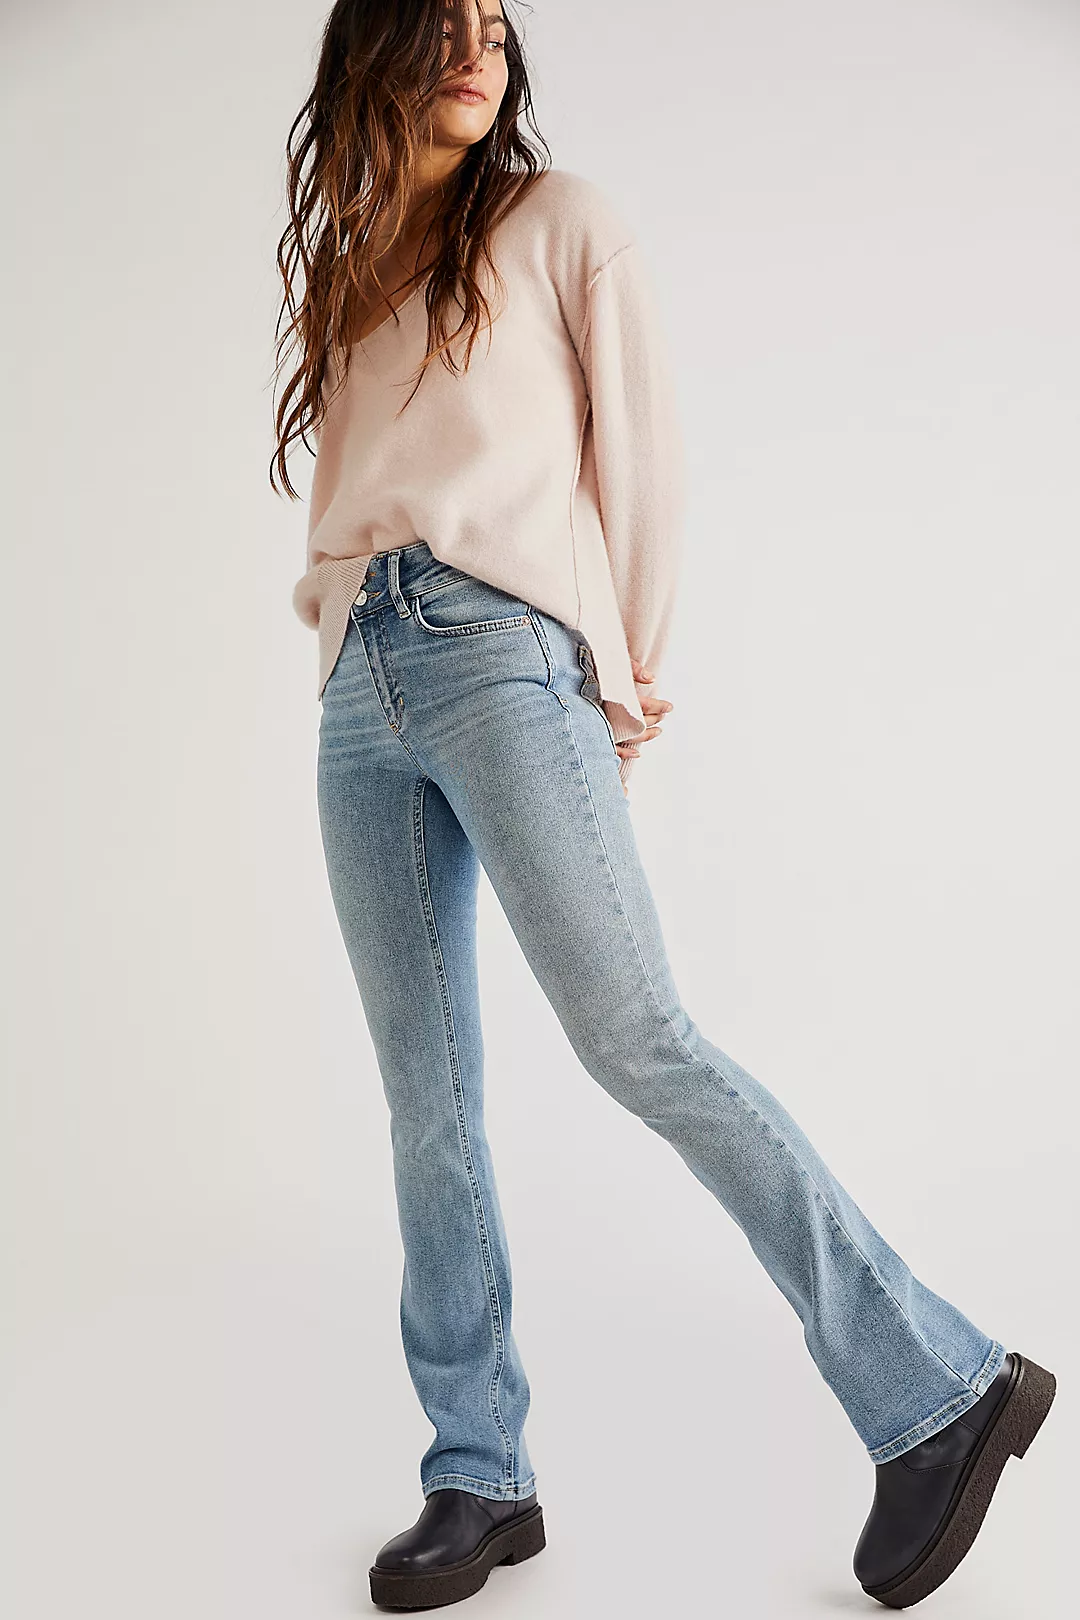 Shayla Skinny Flare Jeans Freepeople